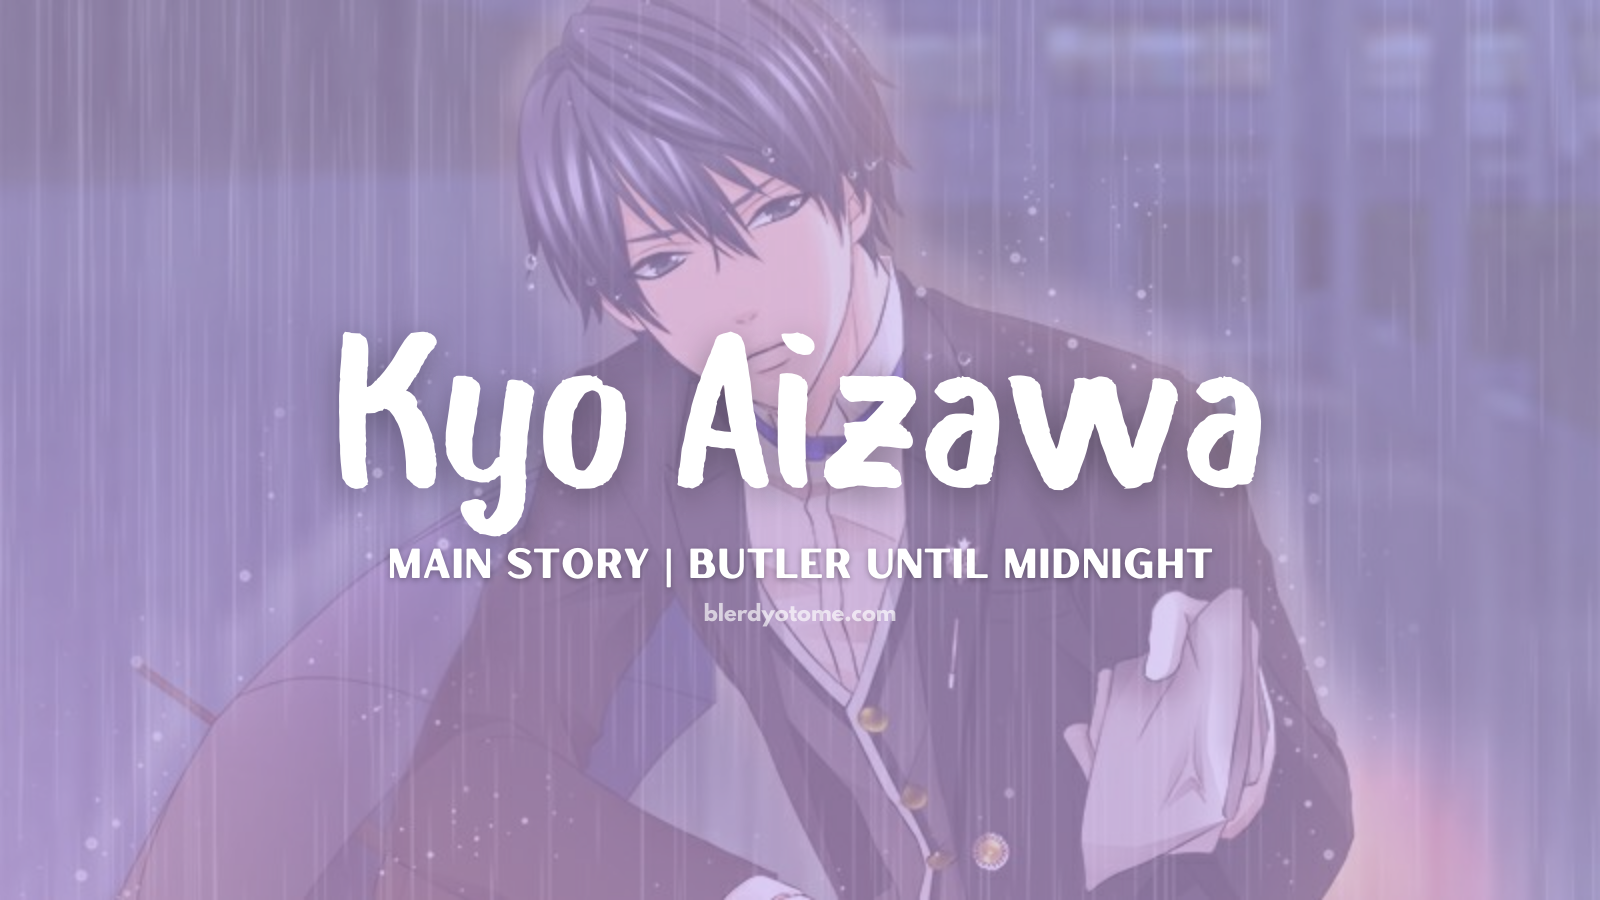 Butler Until Midnight | Kyo Aizawa Review: The Silent Butler Who Stole My Heart